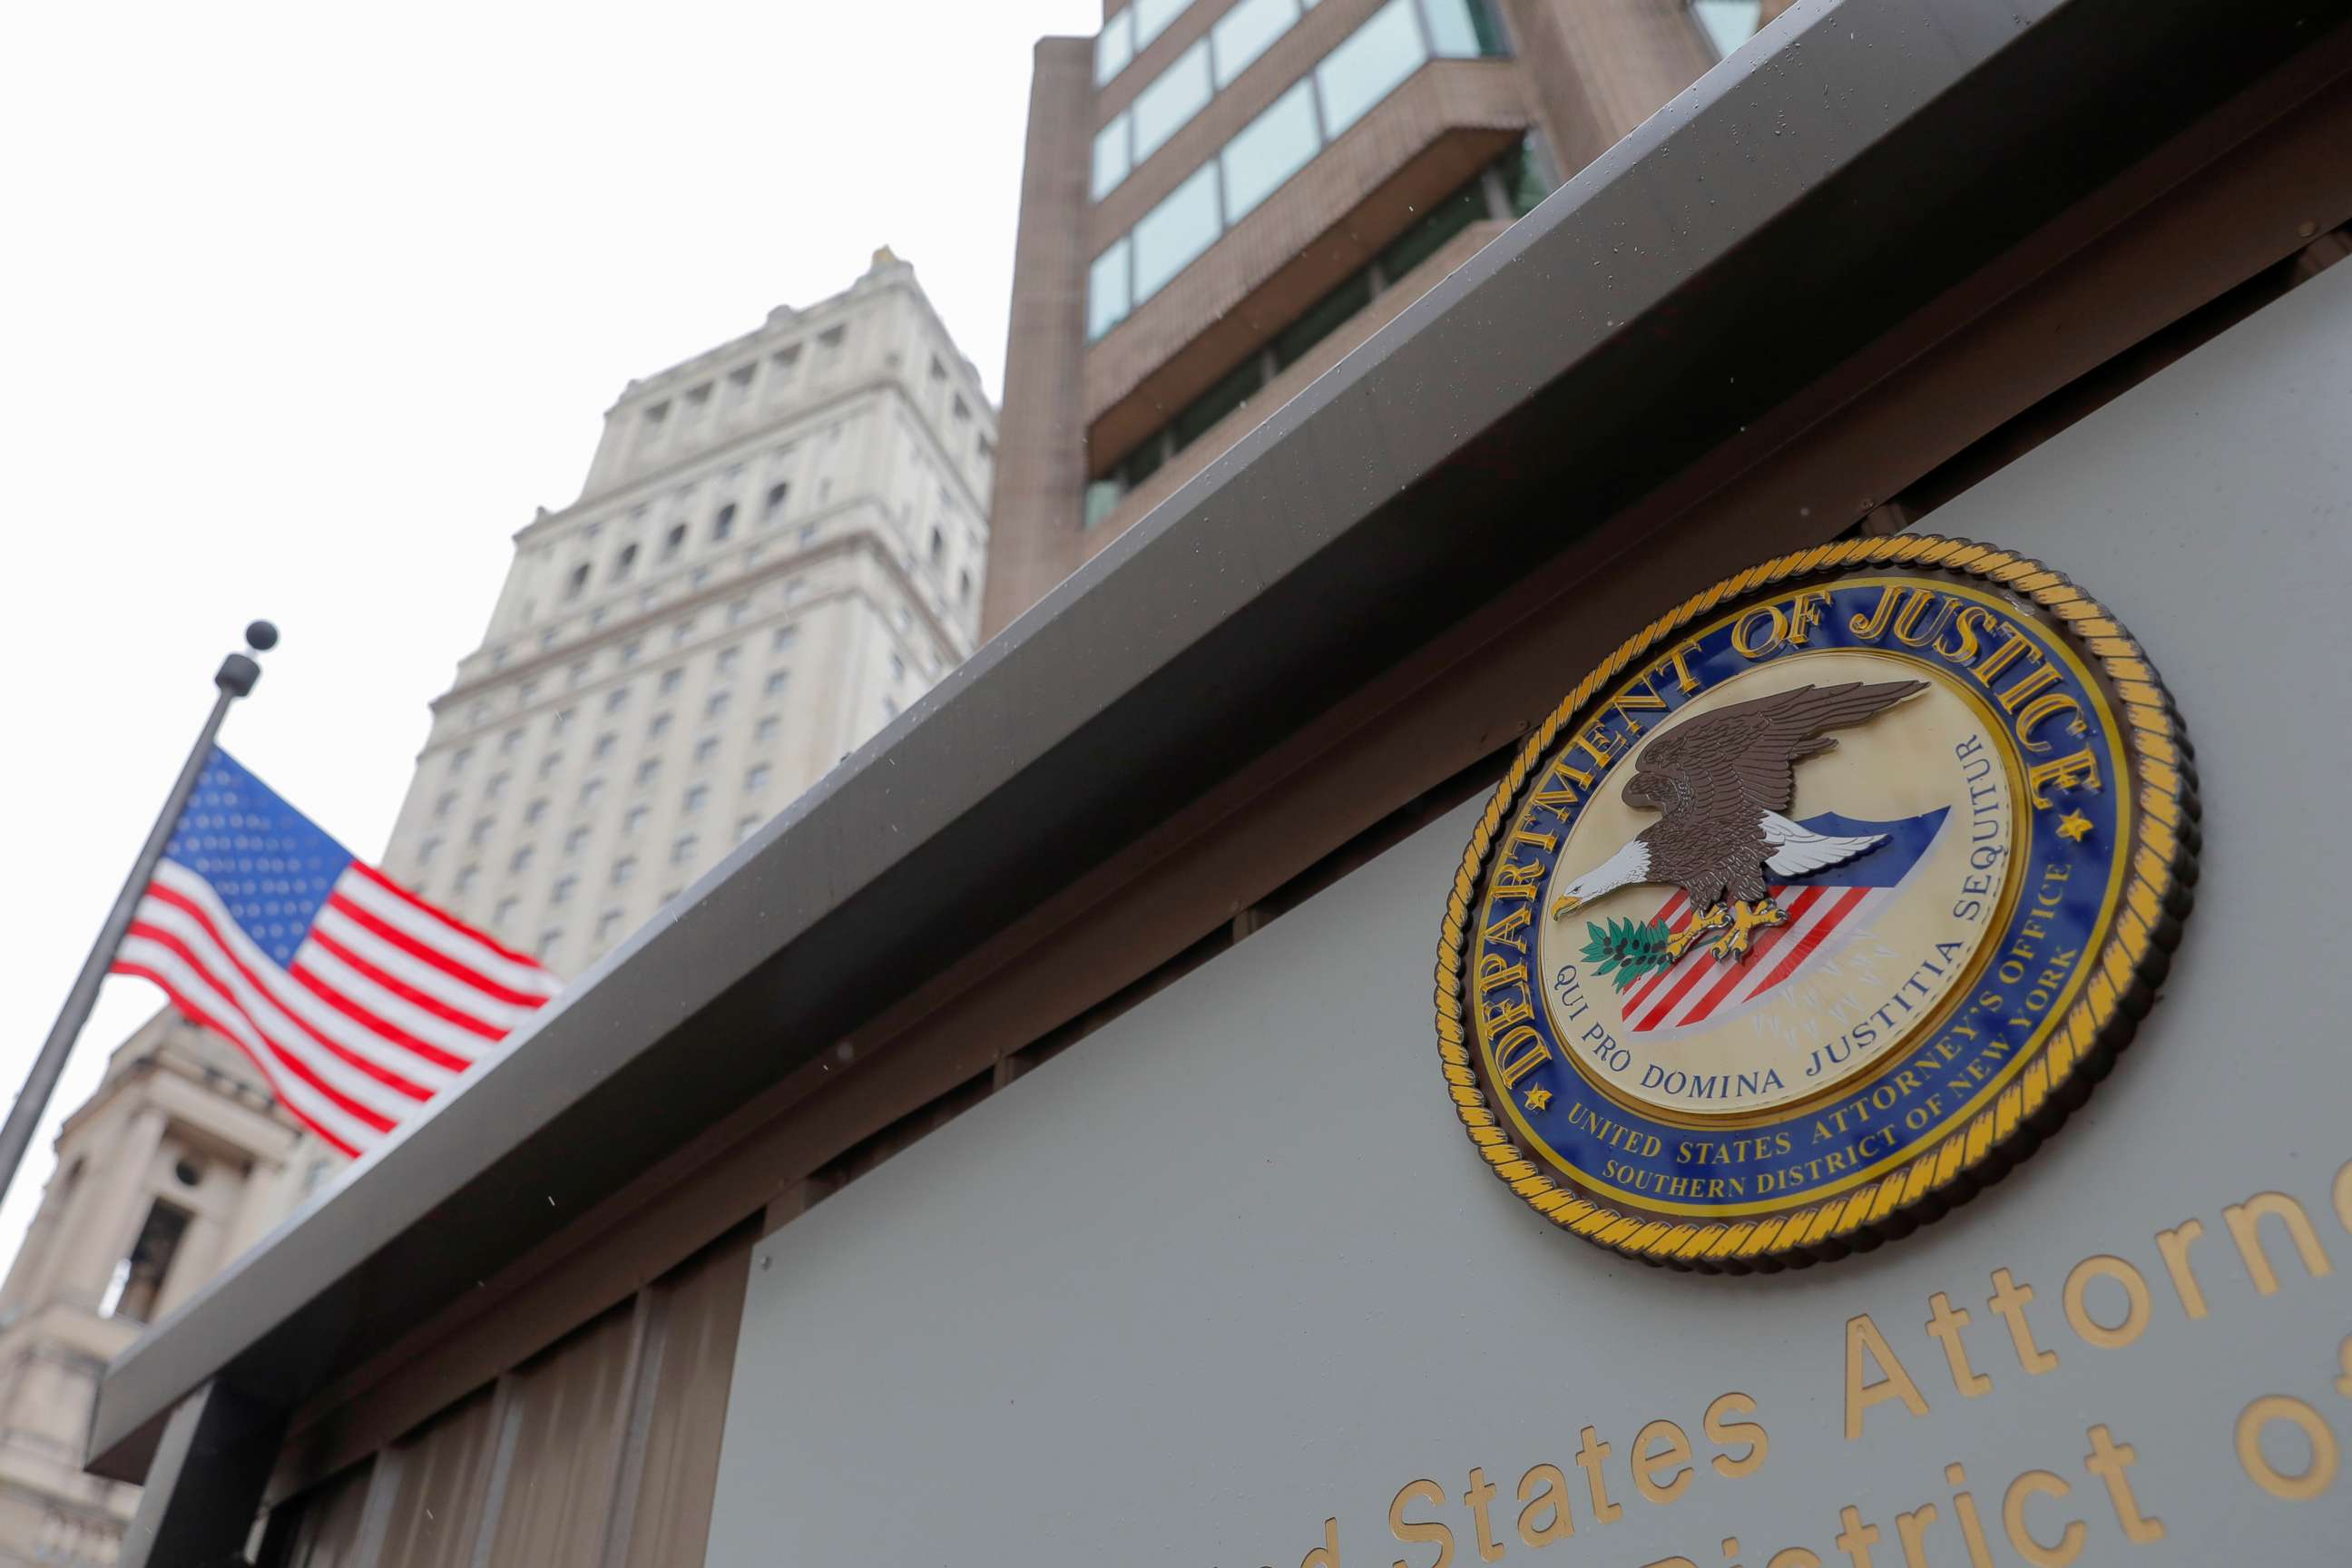 PHOTO: The seal of the U.S. Department of Justice is seen on the building exterior of the United States Attorney's Office of the Southern District of New York on Aug. 17, 2020.